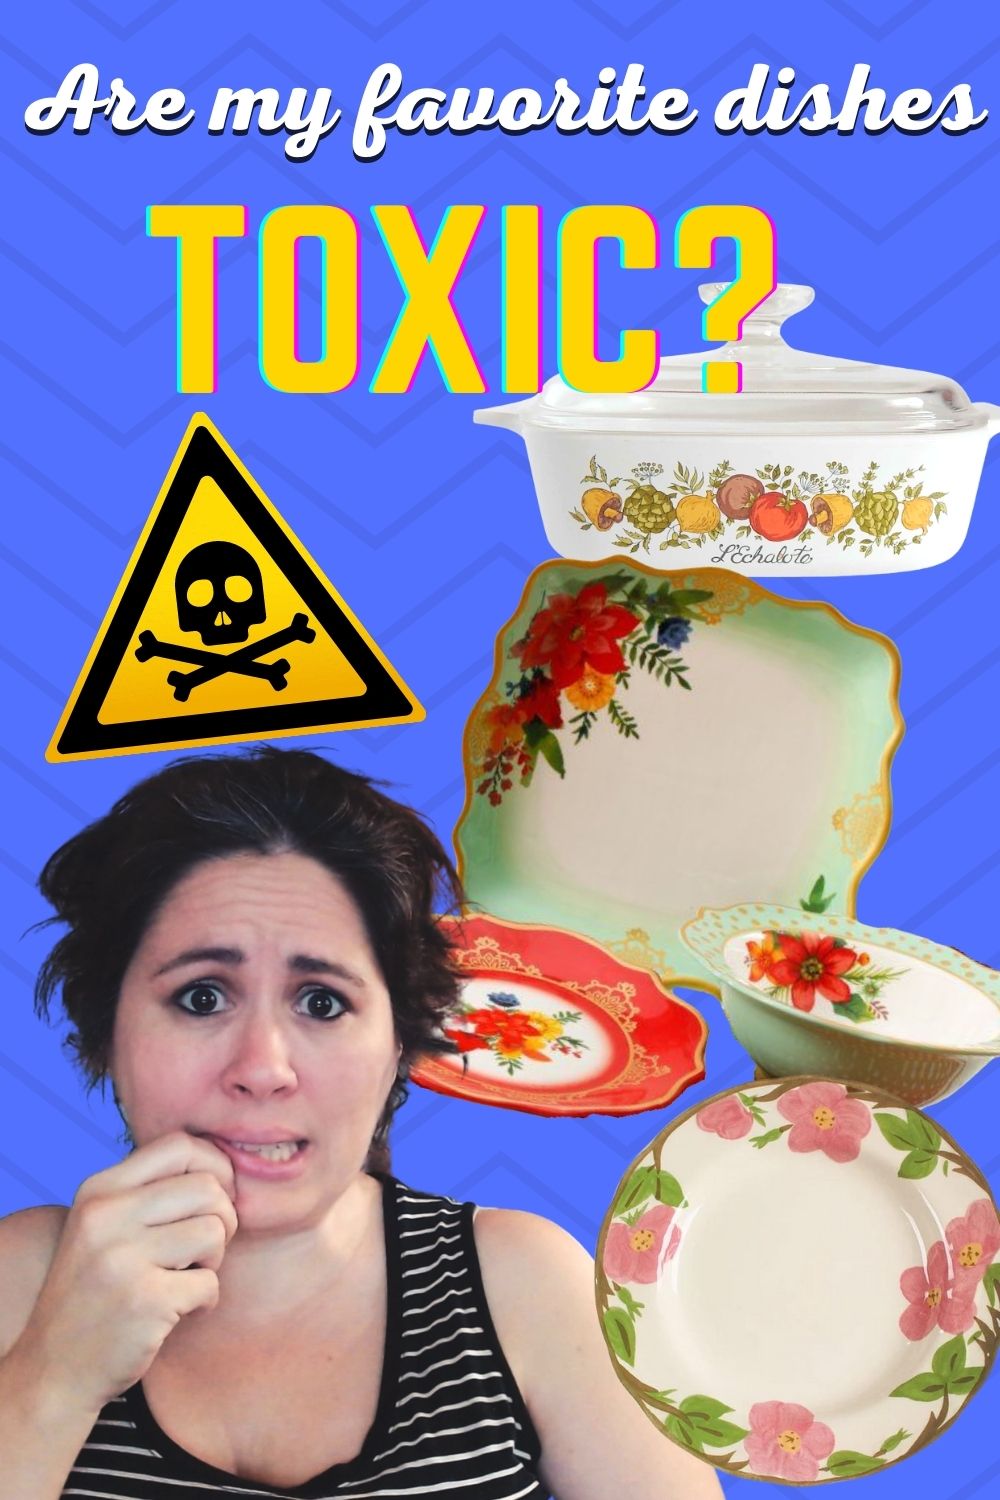 Are my favorite dishes toxic?